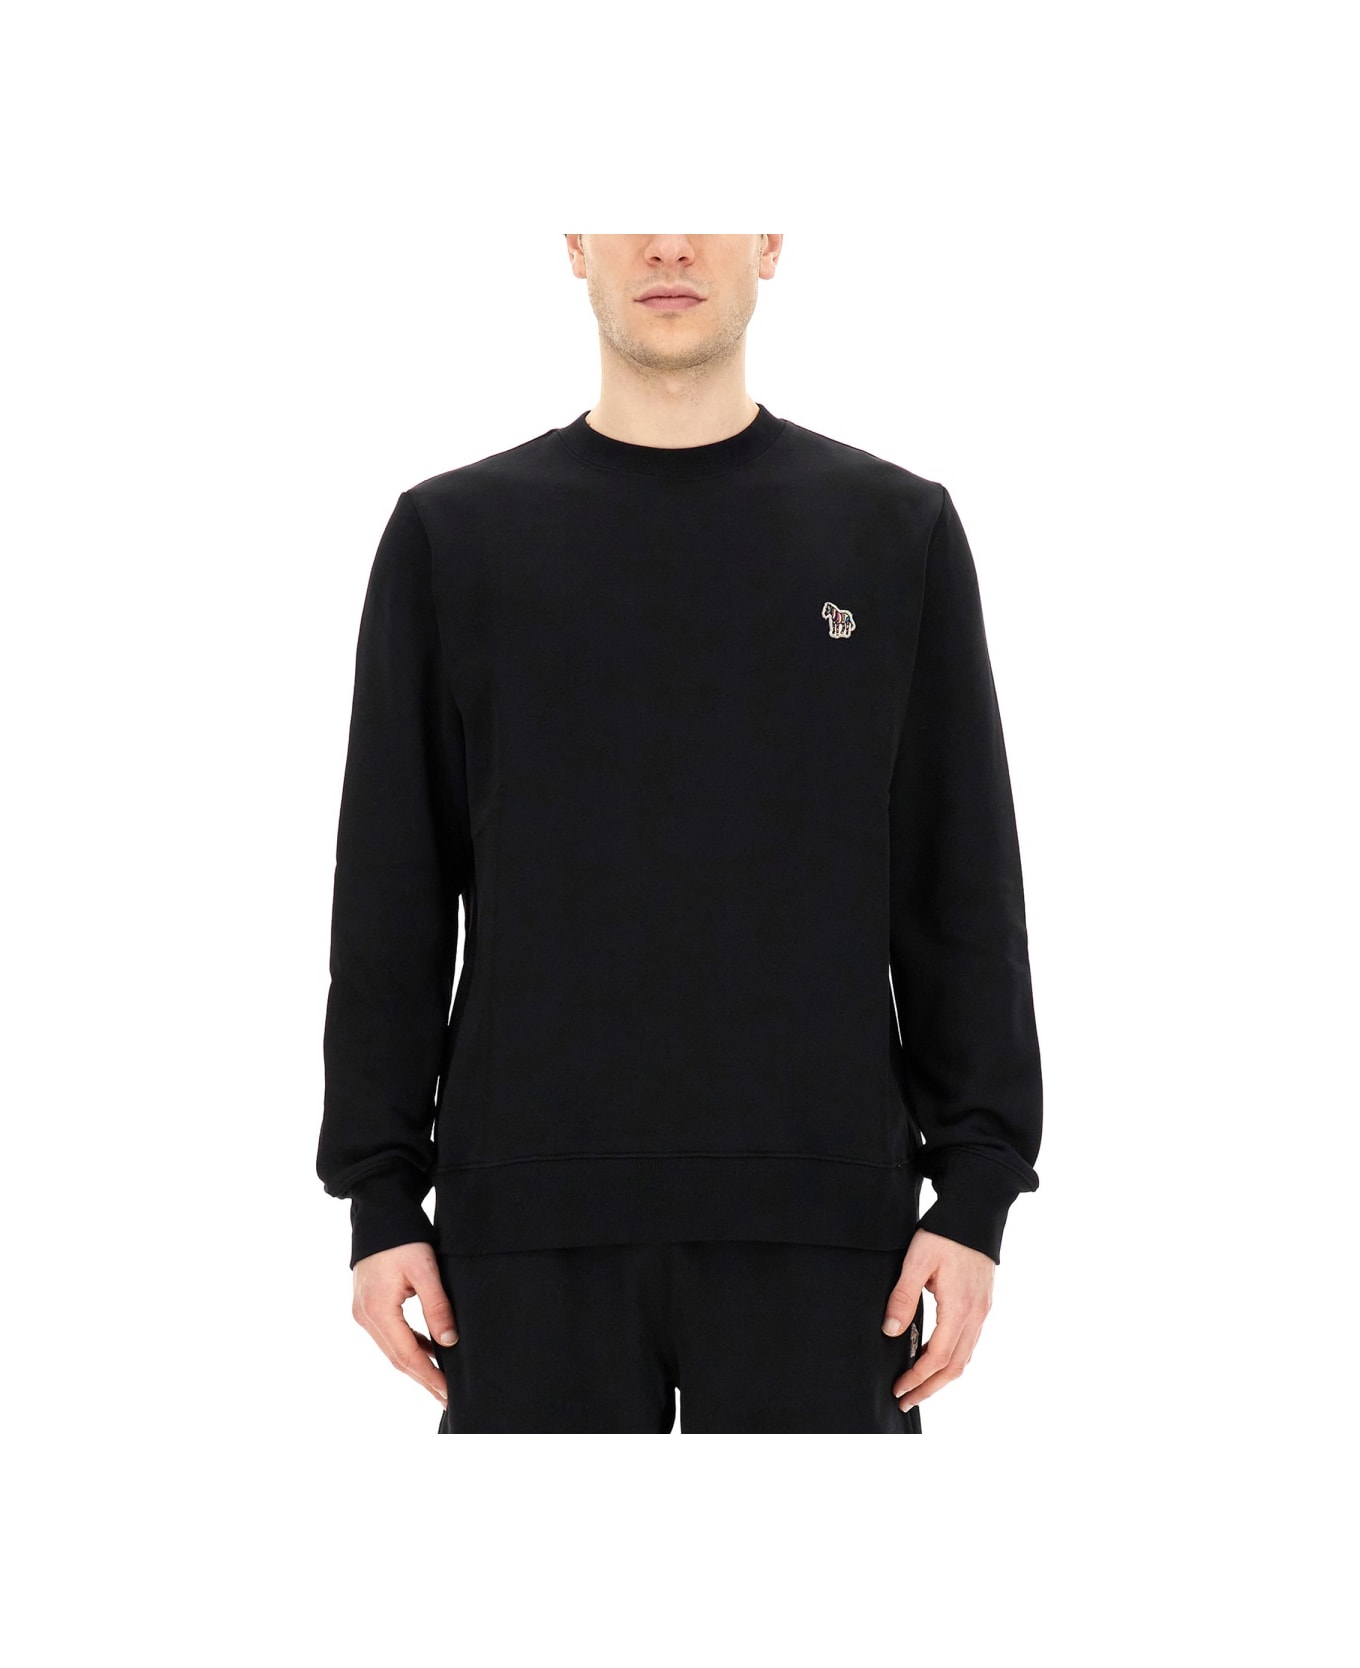 PS by Paul Smith Sweatshirt With Zebra Embroidery - BLACK フリース